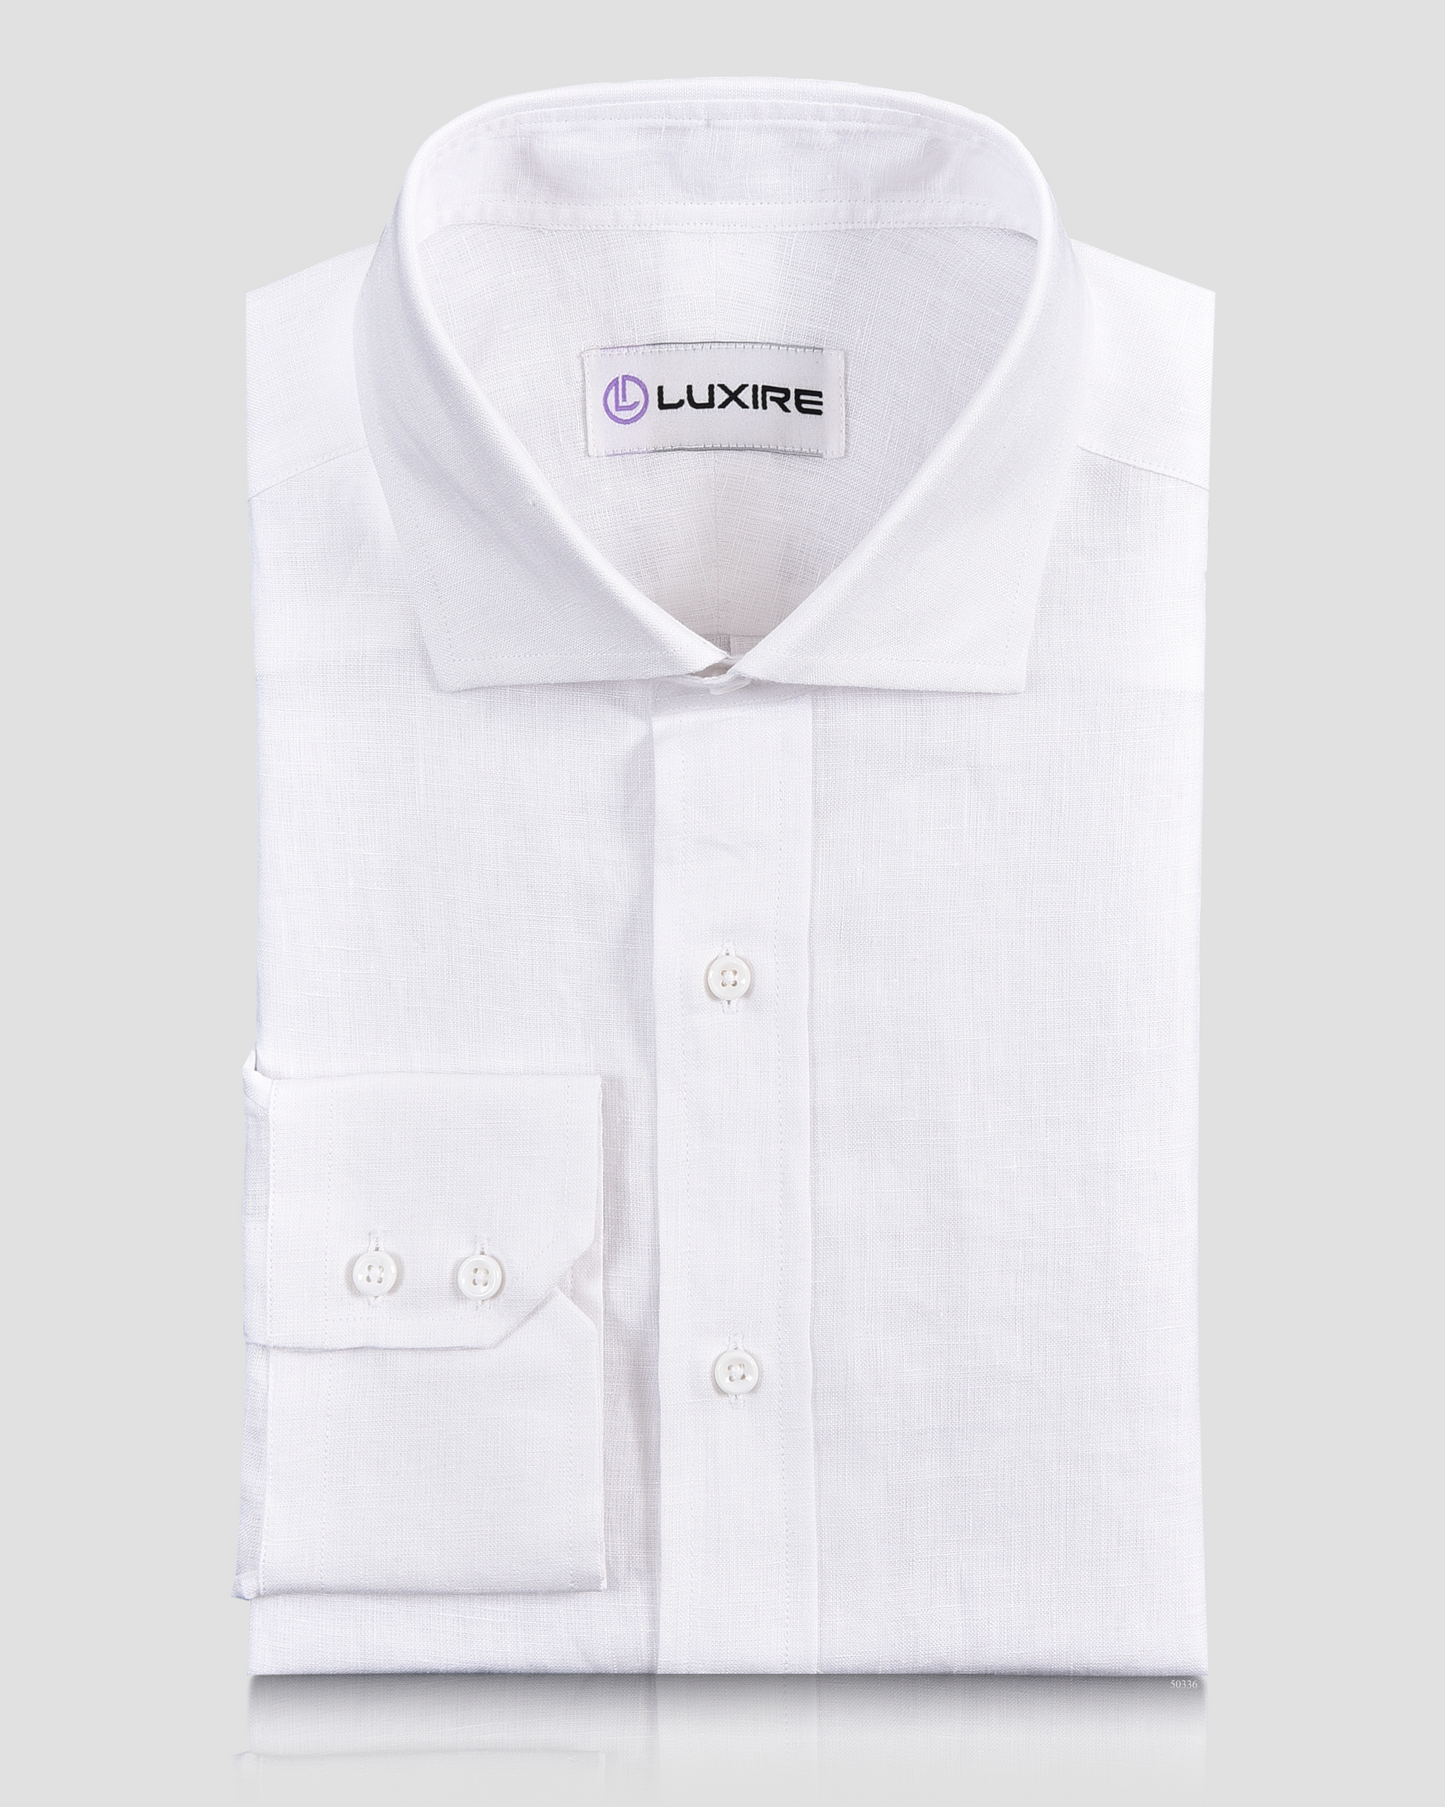 Front view of custom linen shirt for men by Luxire in white